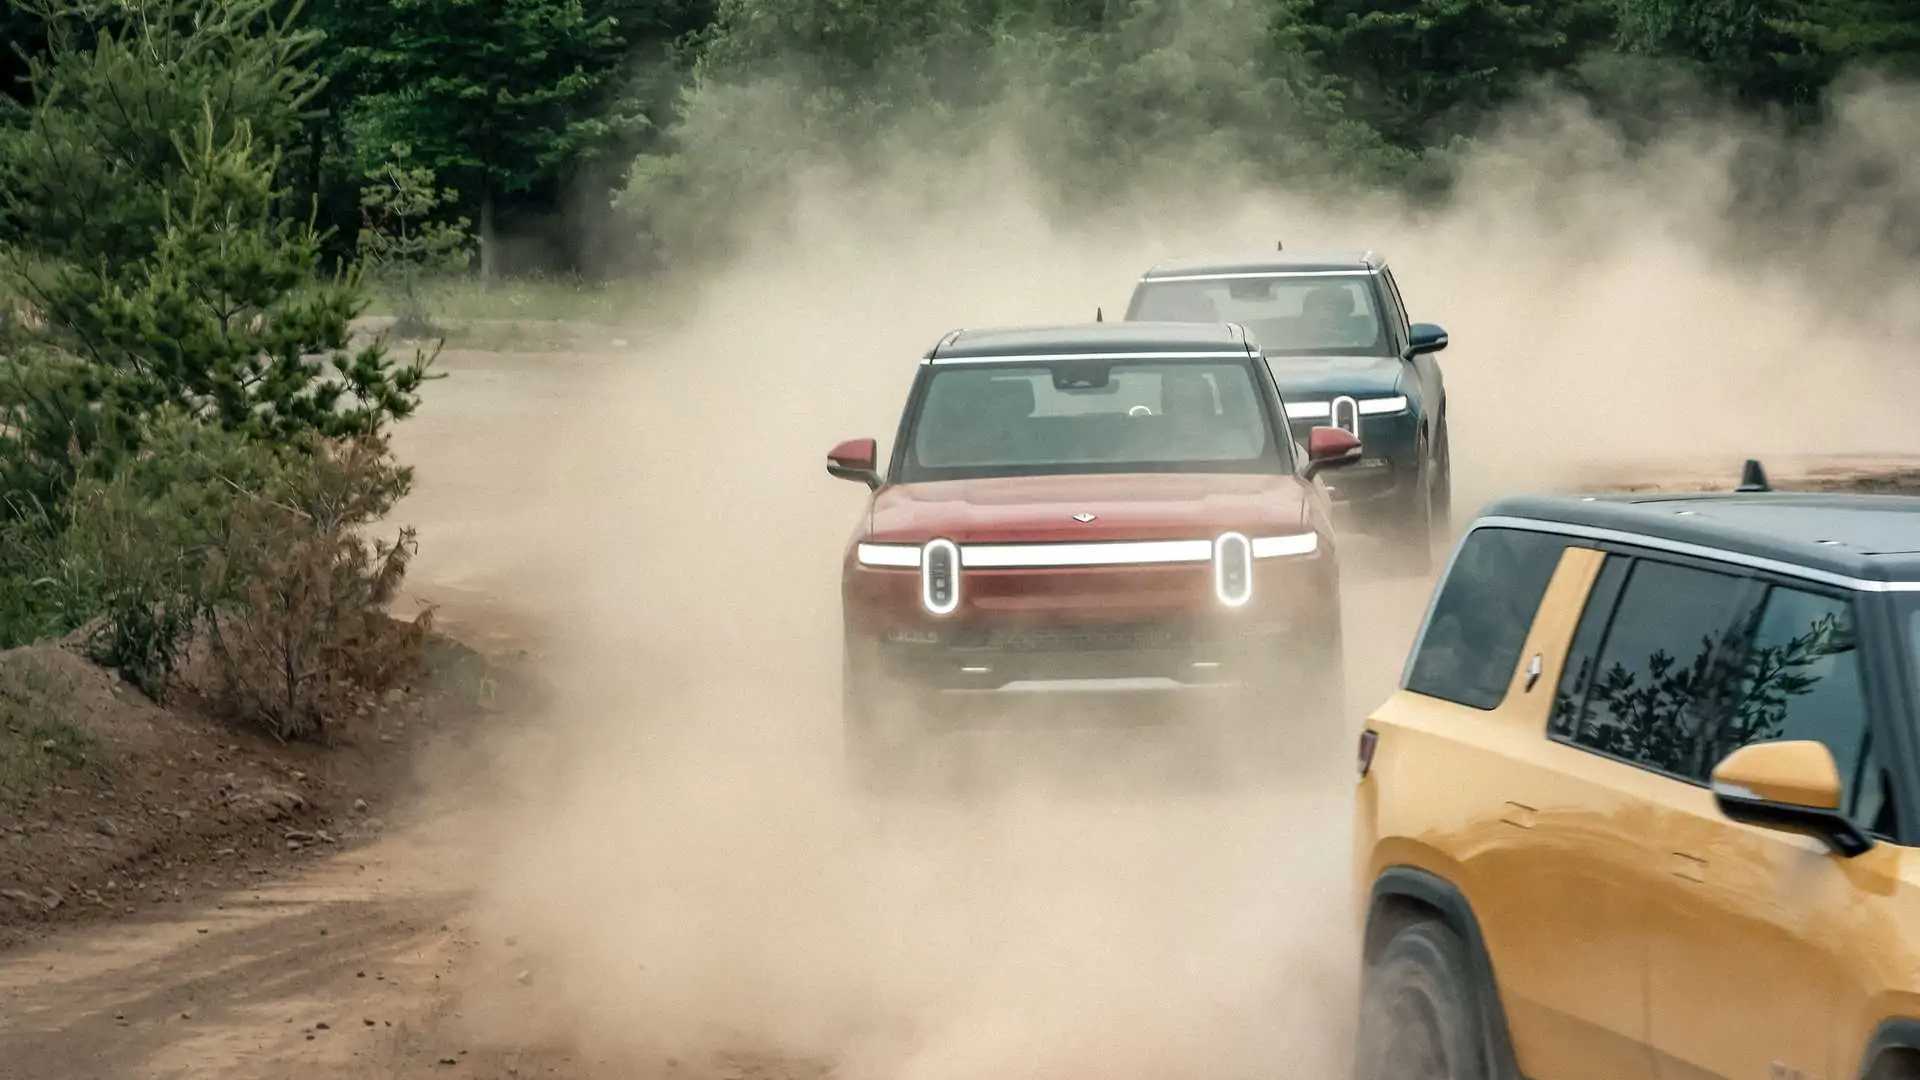 rivian could launch 1,000 hp+ r1t, r1s variants in 2024